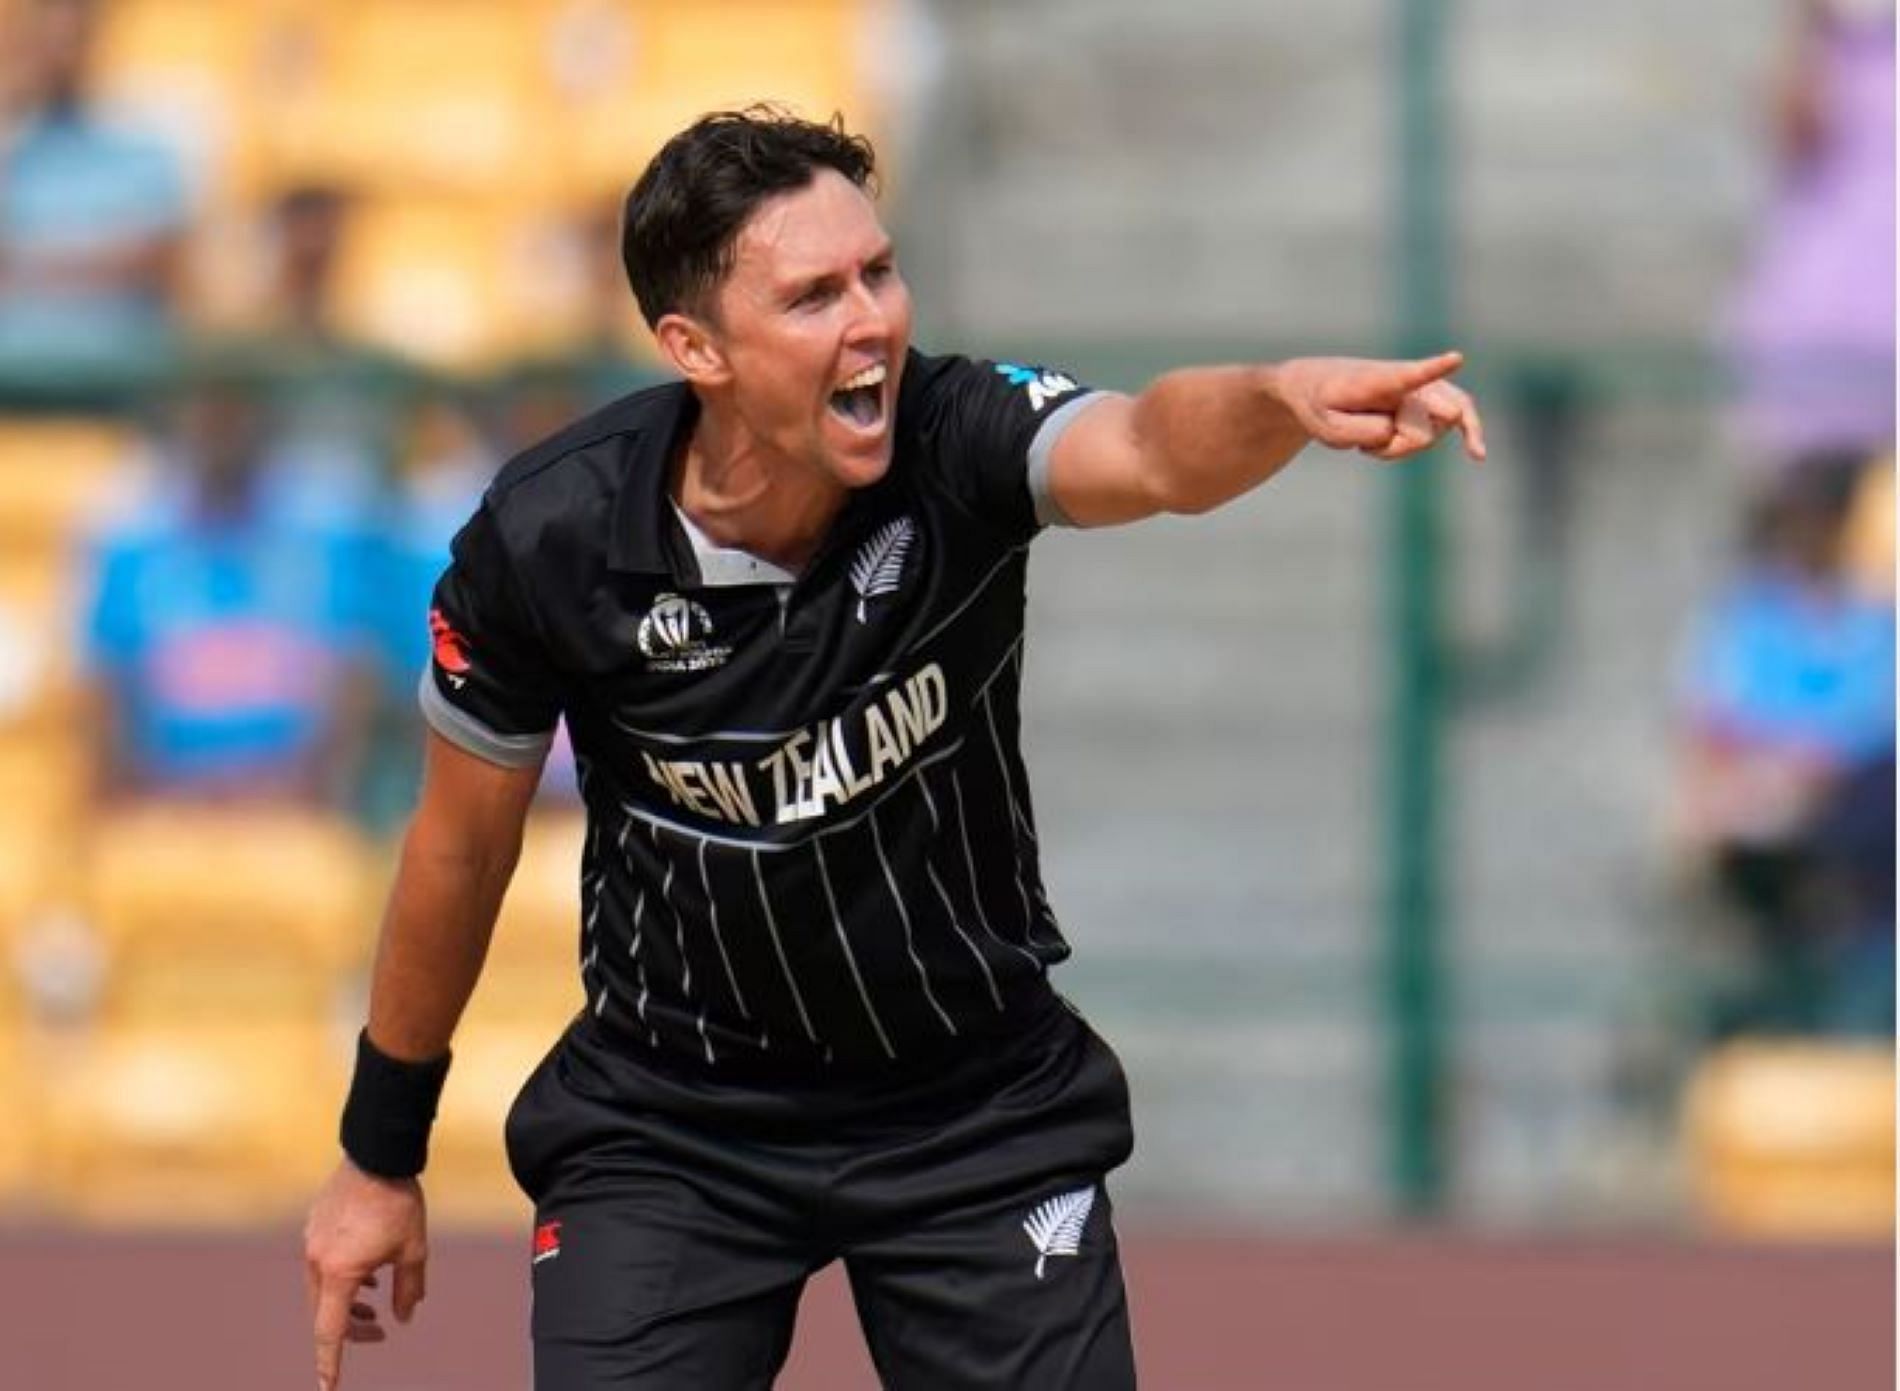 Boult finally found form in the previous game against Sri Lanka.